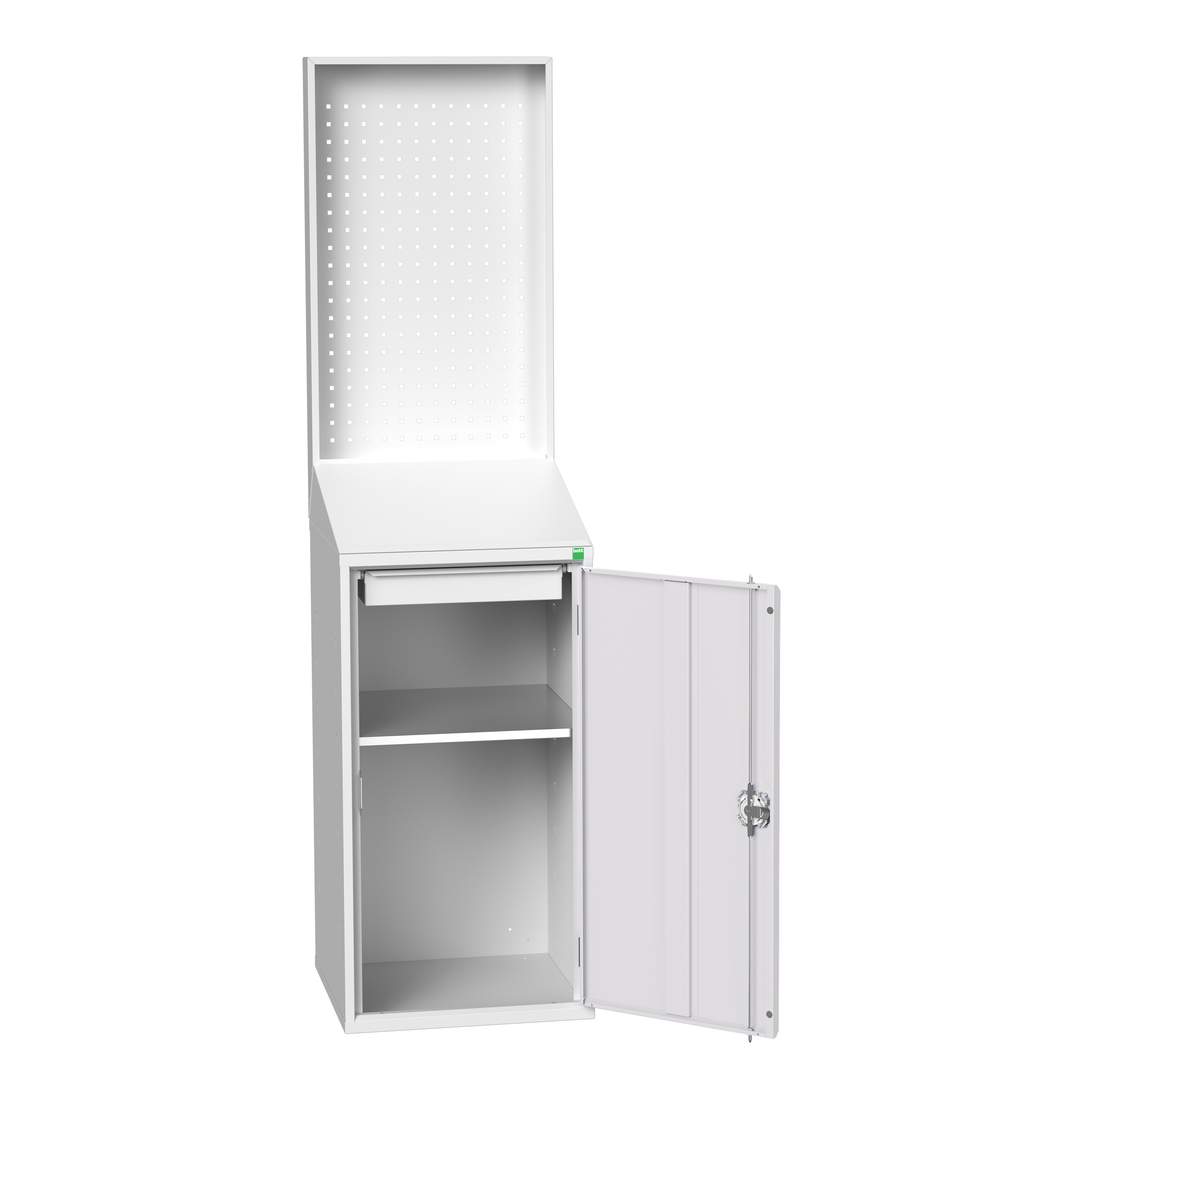 16929025.16 - verso economy lectern with backpanel